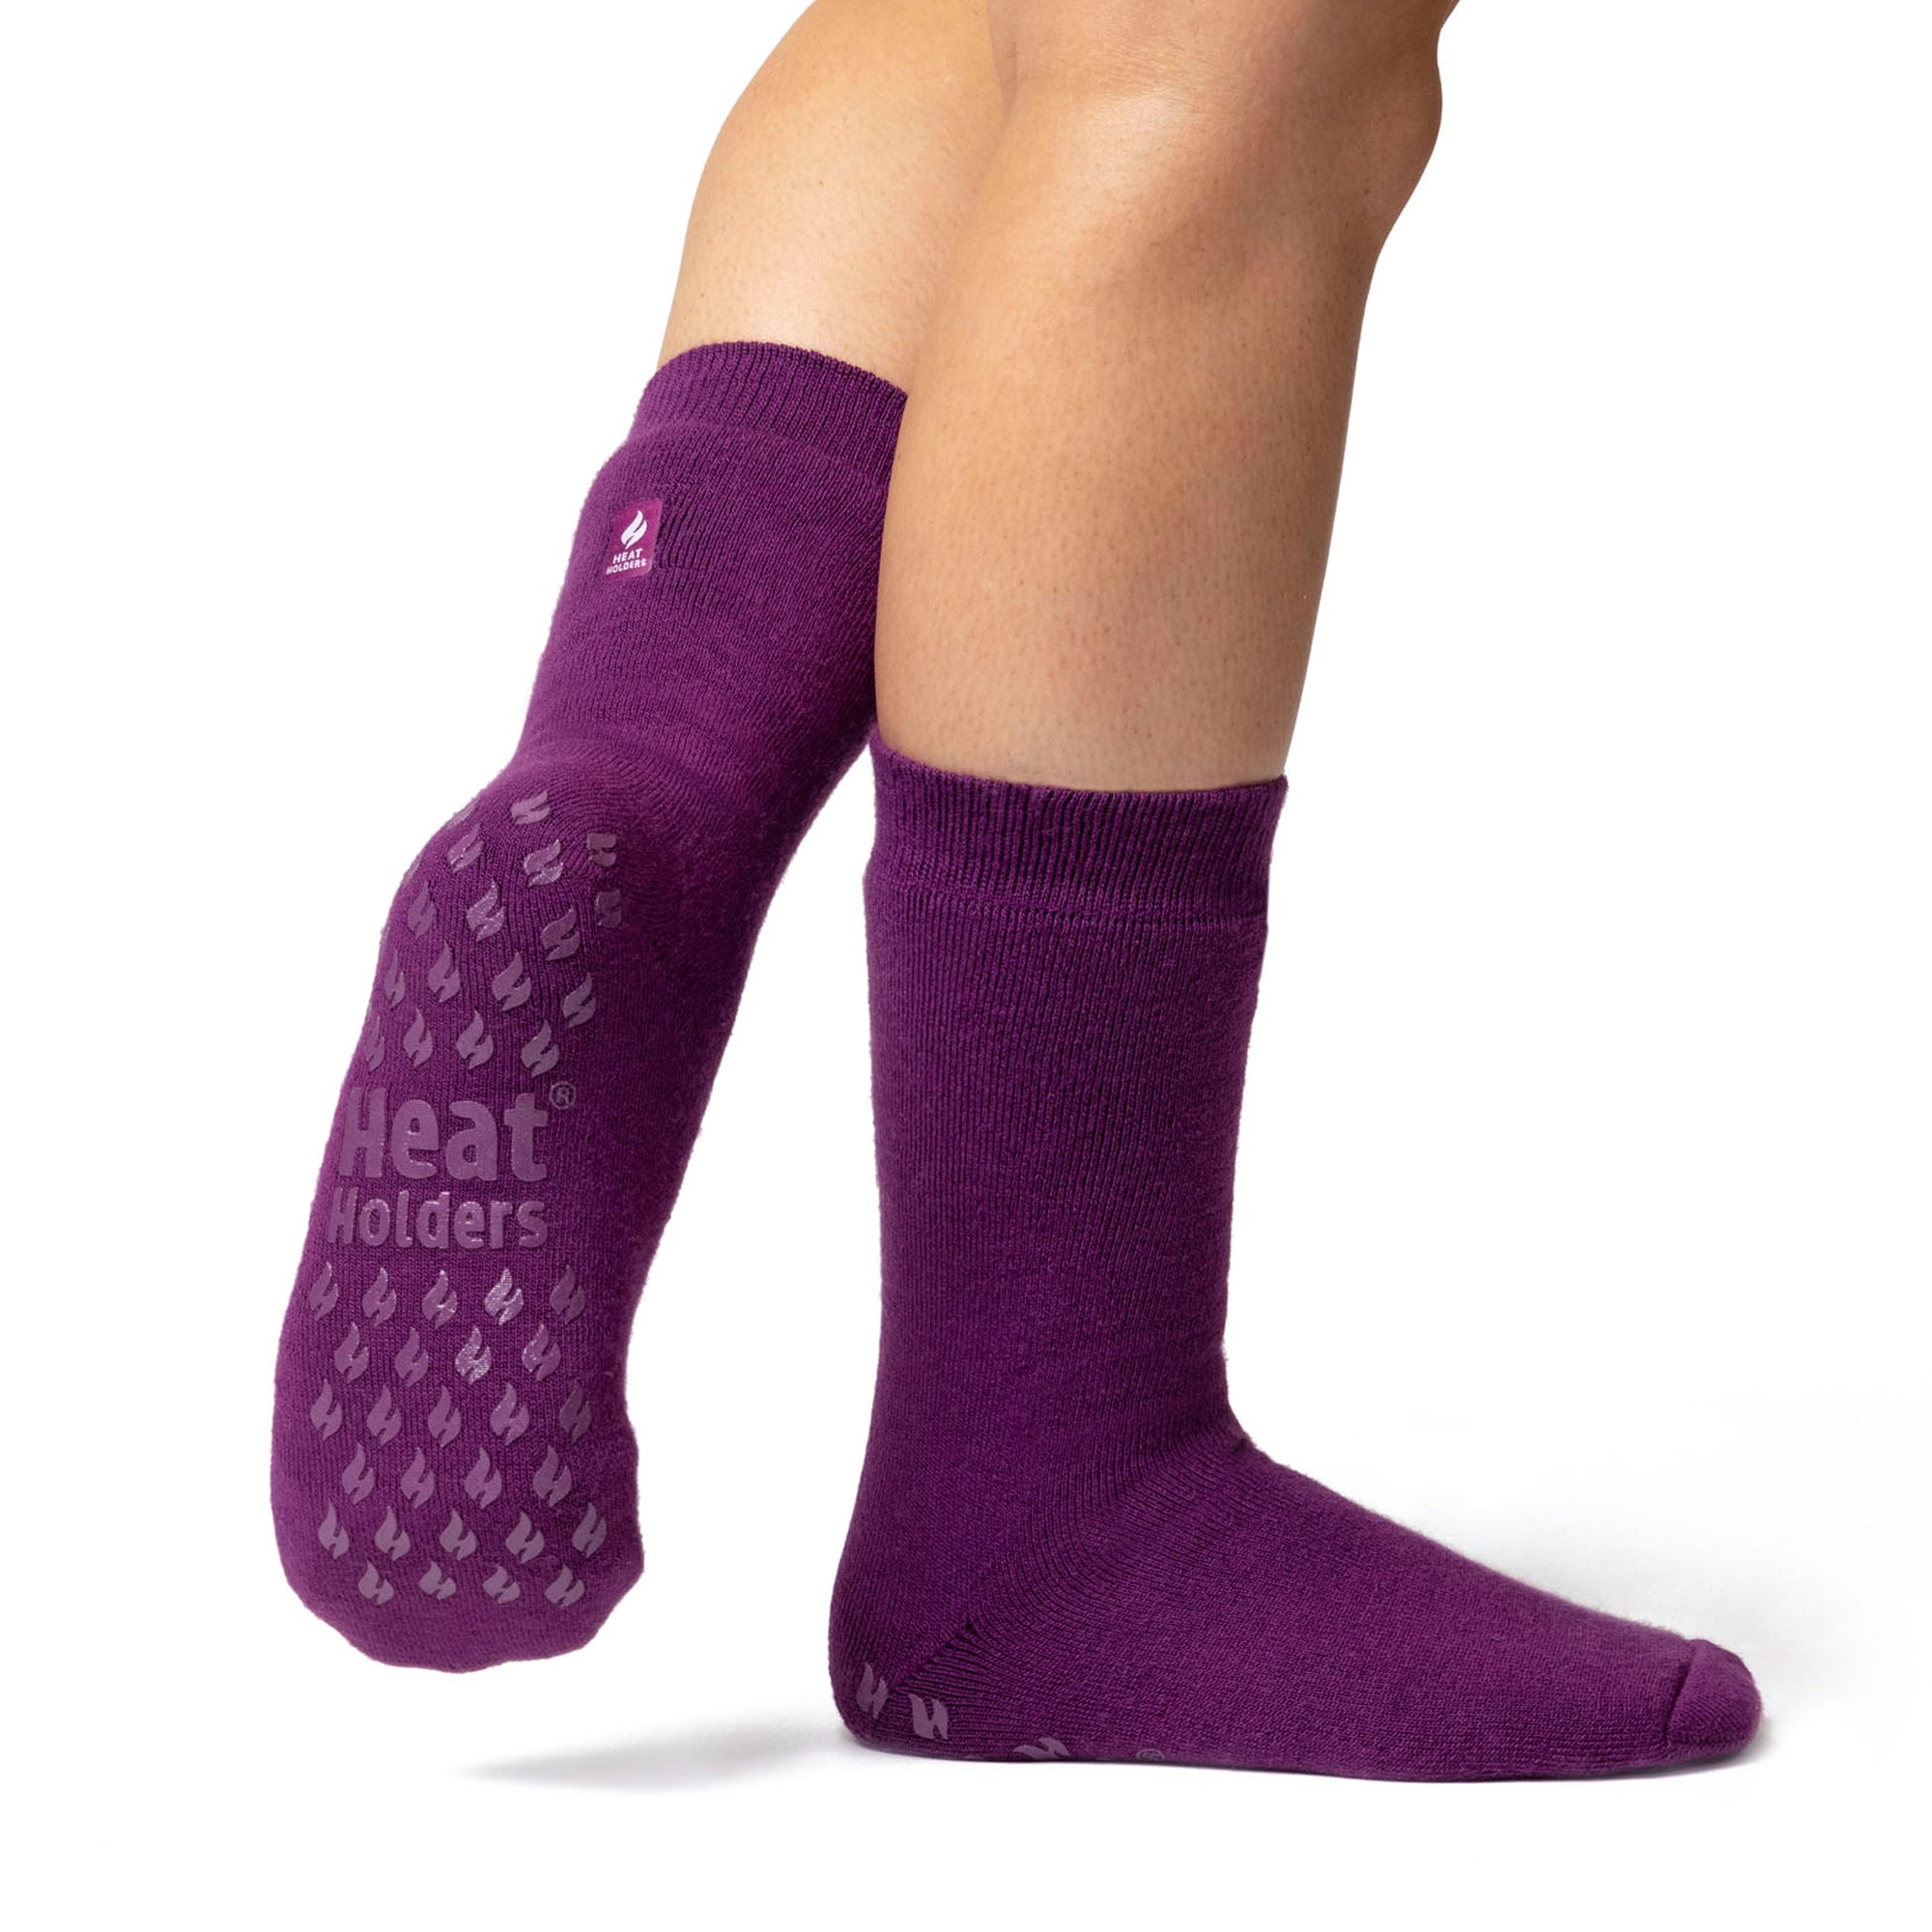 Swiss Protection Socks Review - BirthdayShoes